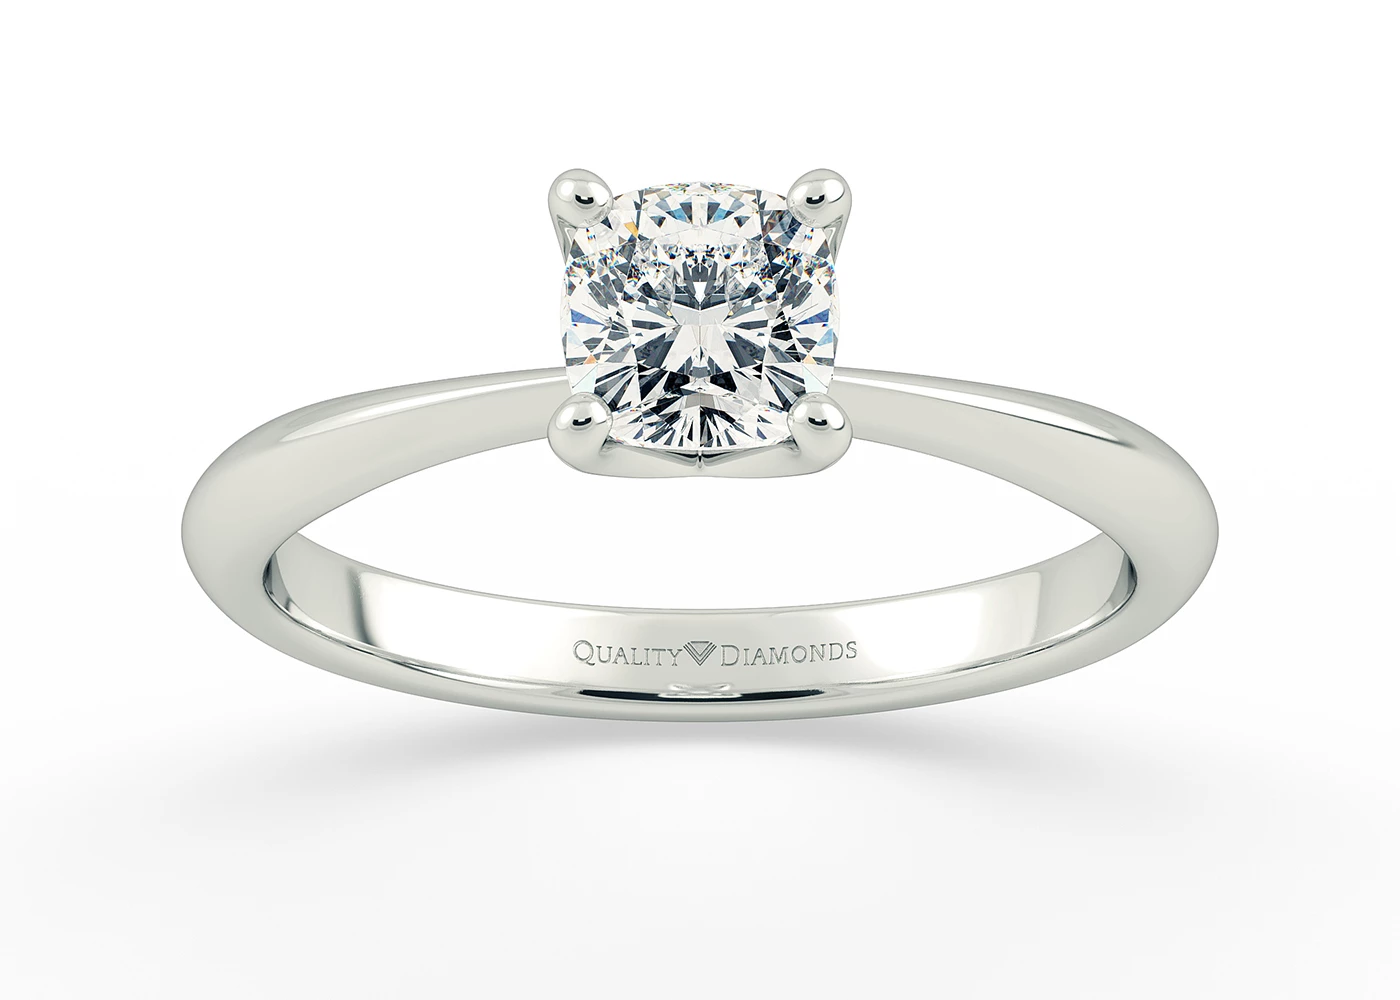 One Carat Cushion Solitaire Diamond Engagement Ring in 9K White Gold